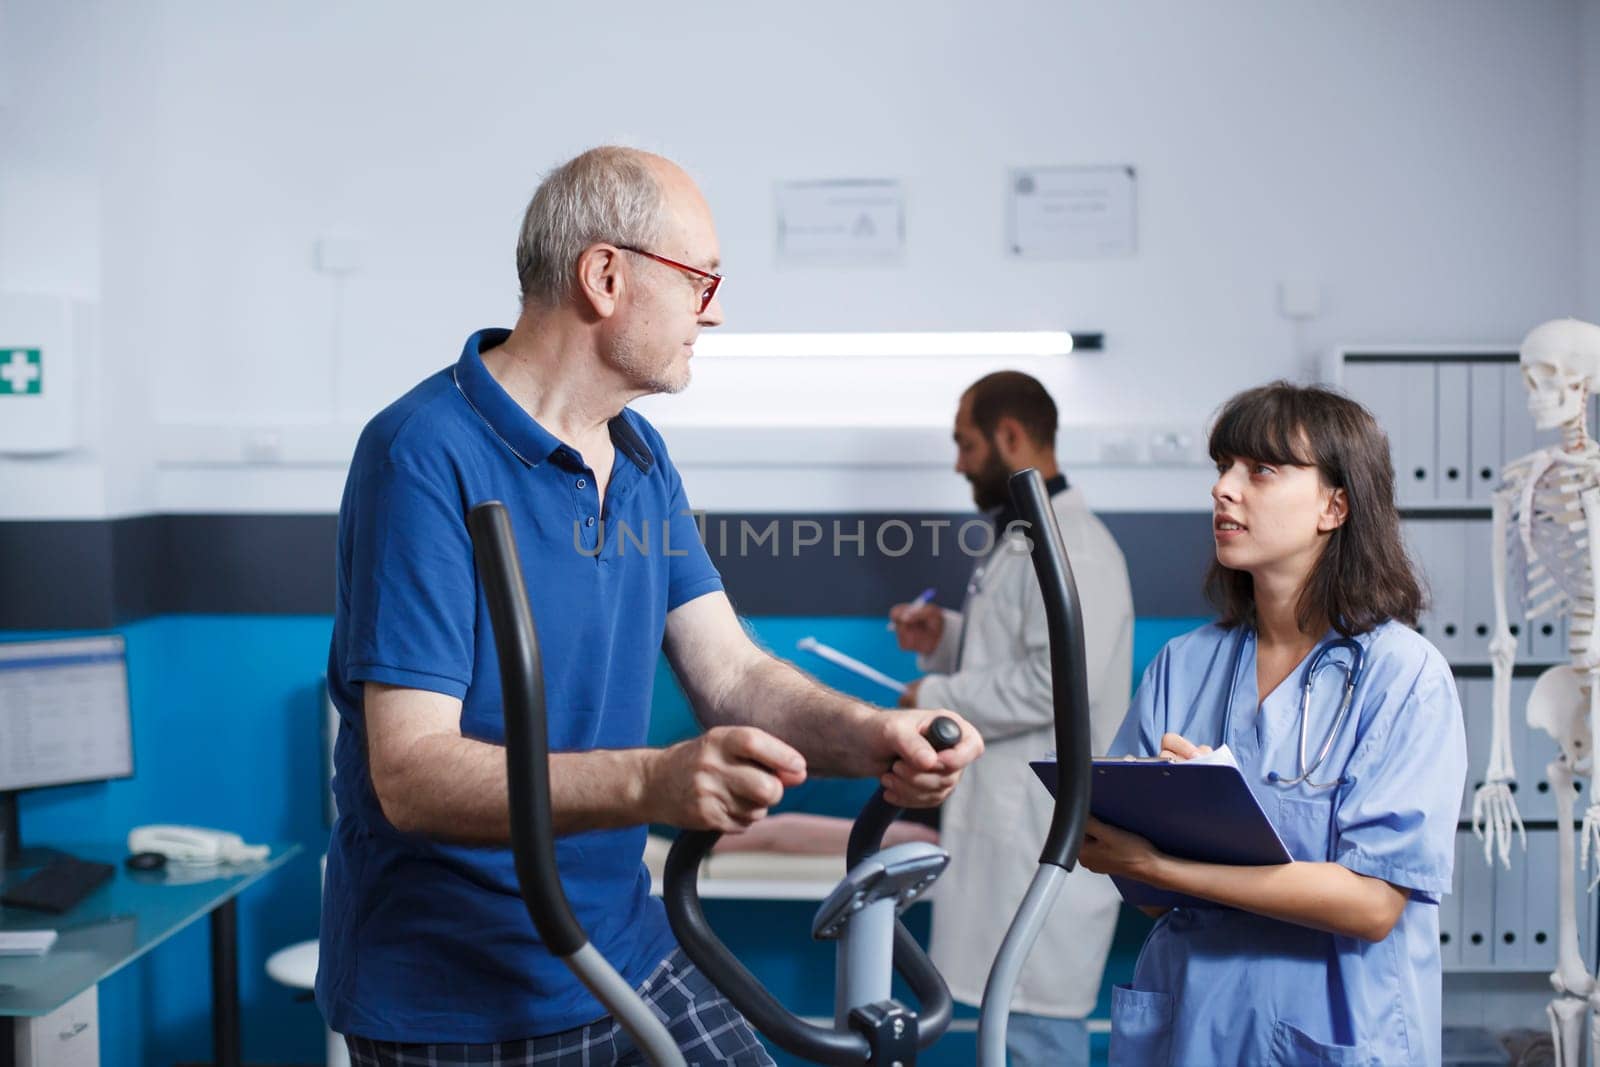 Elderly patient is seen receiving physiotherapy on stationary bike, assisted by female nurse dressed in blue scrubs. Senior man is getting rehabilitative care with help from health professional.